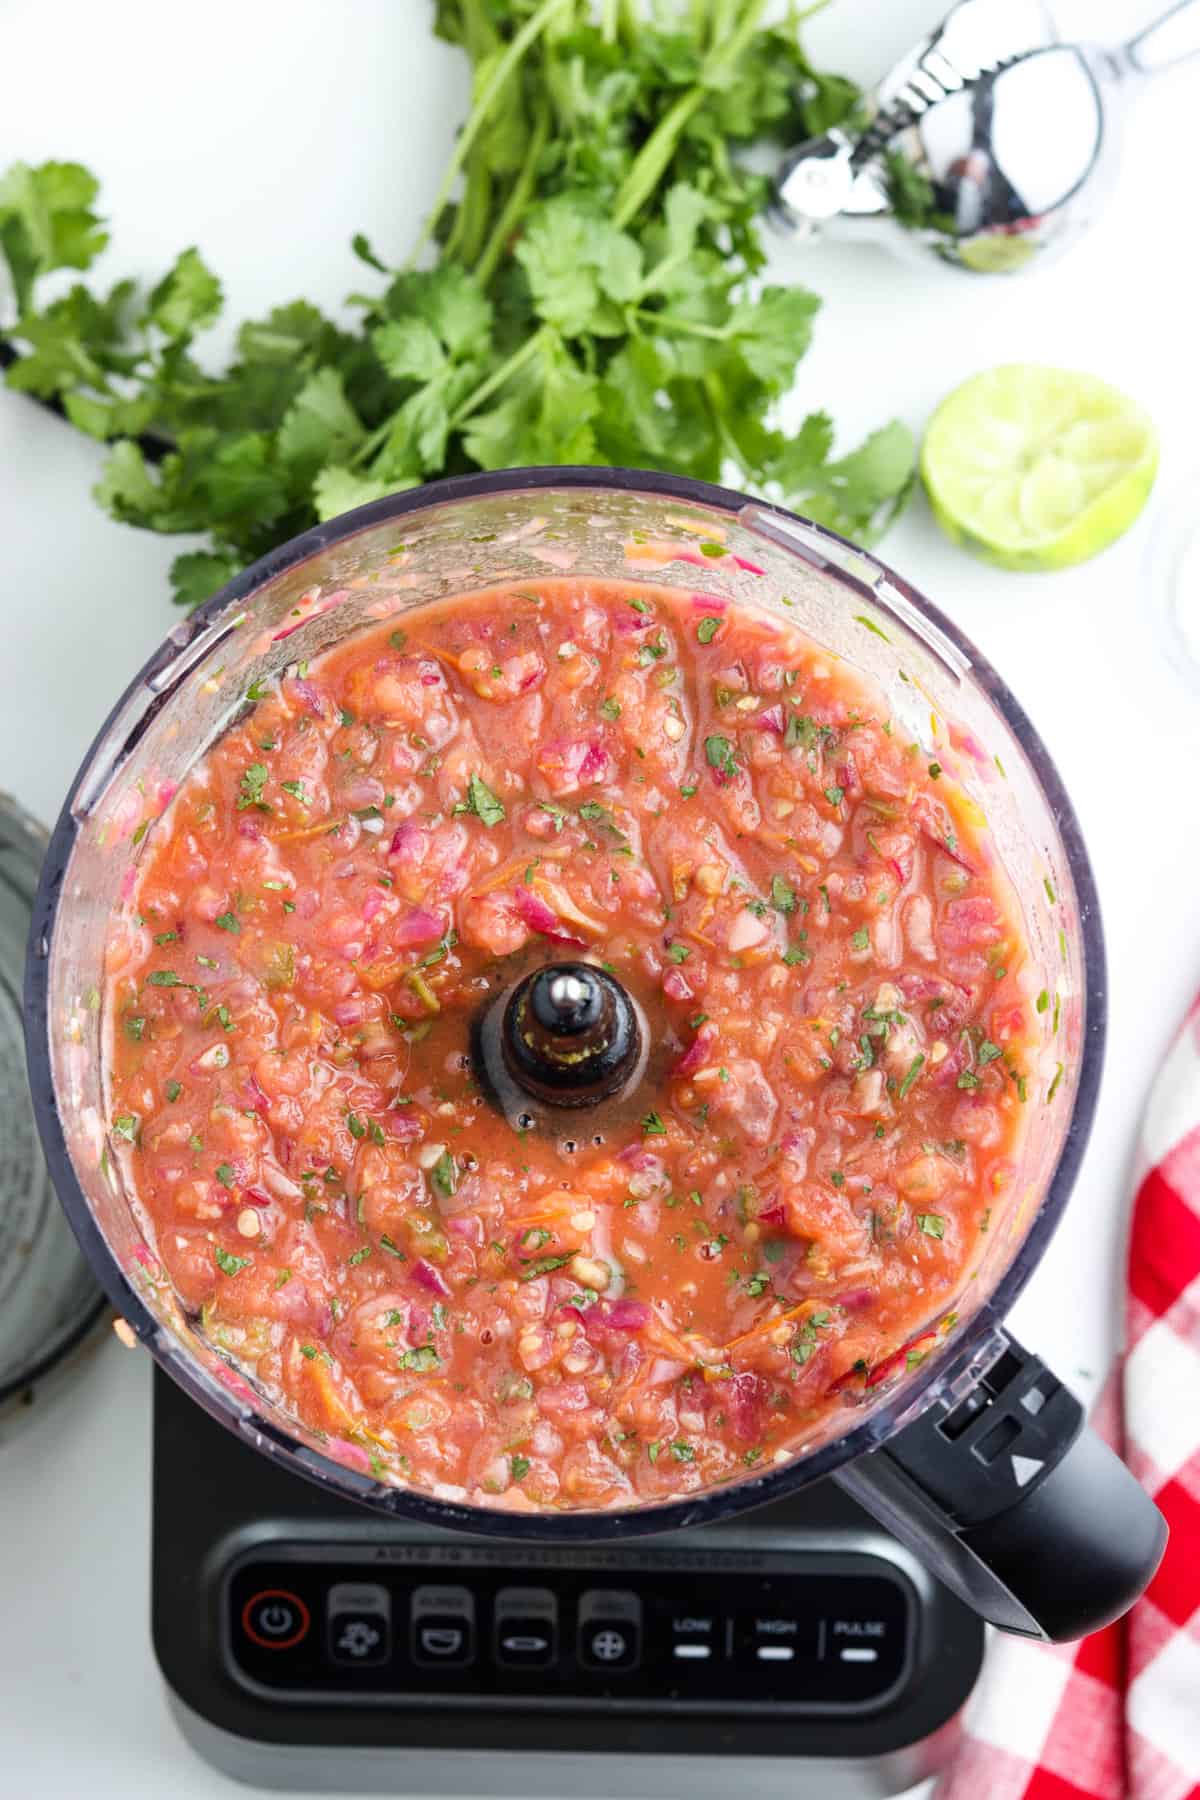 Blended Ingredients in Food Processor for Smoked Traeger Salsa